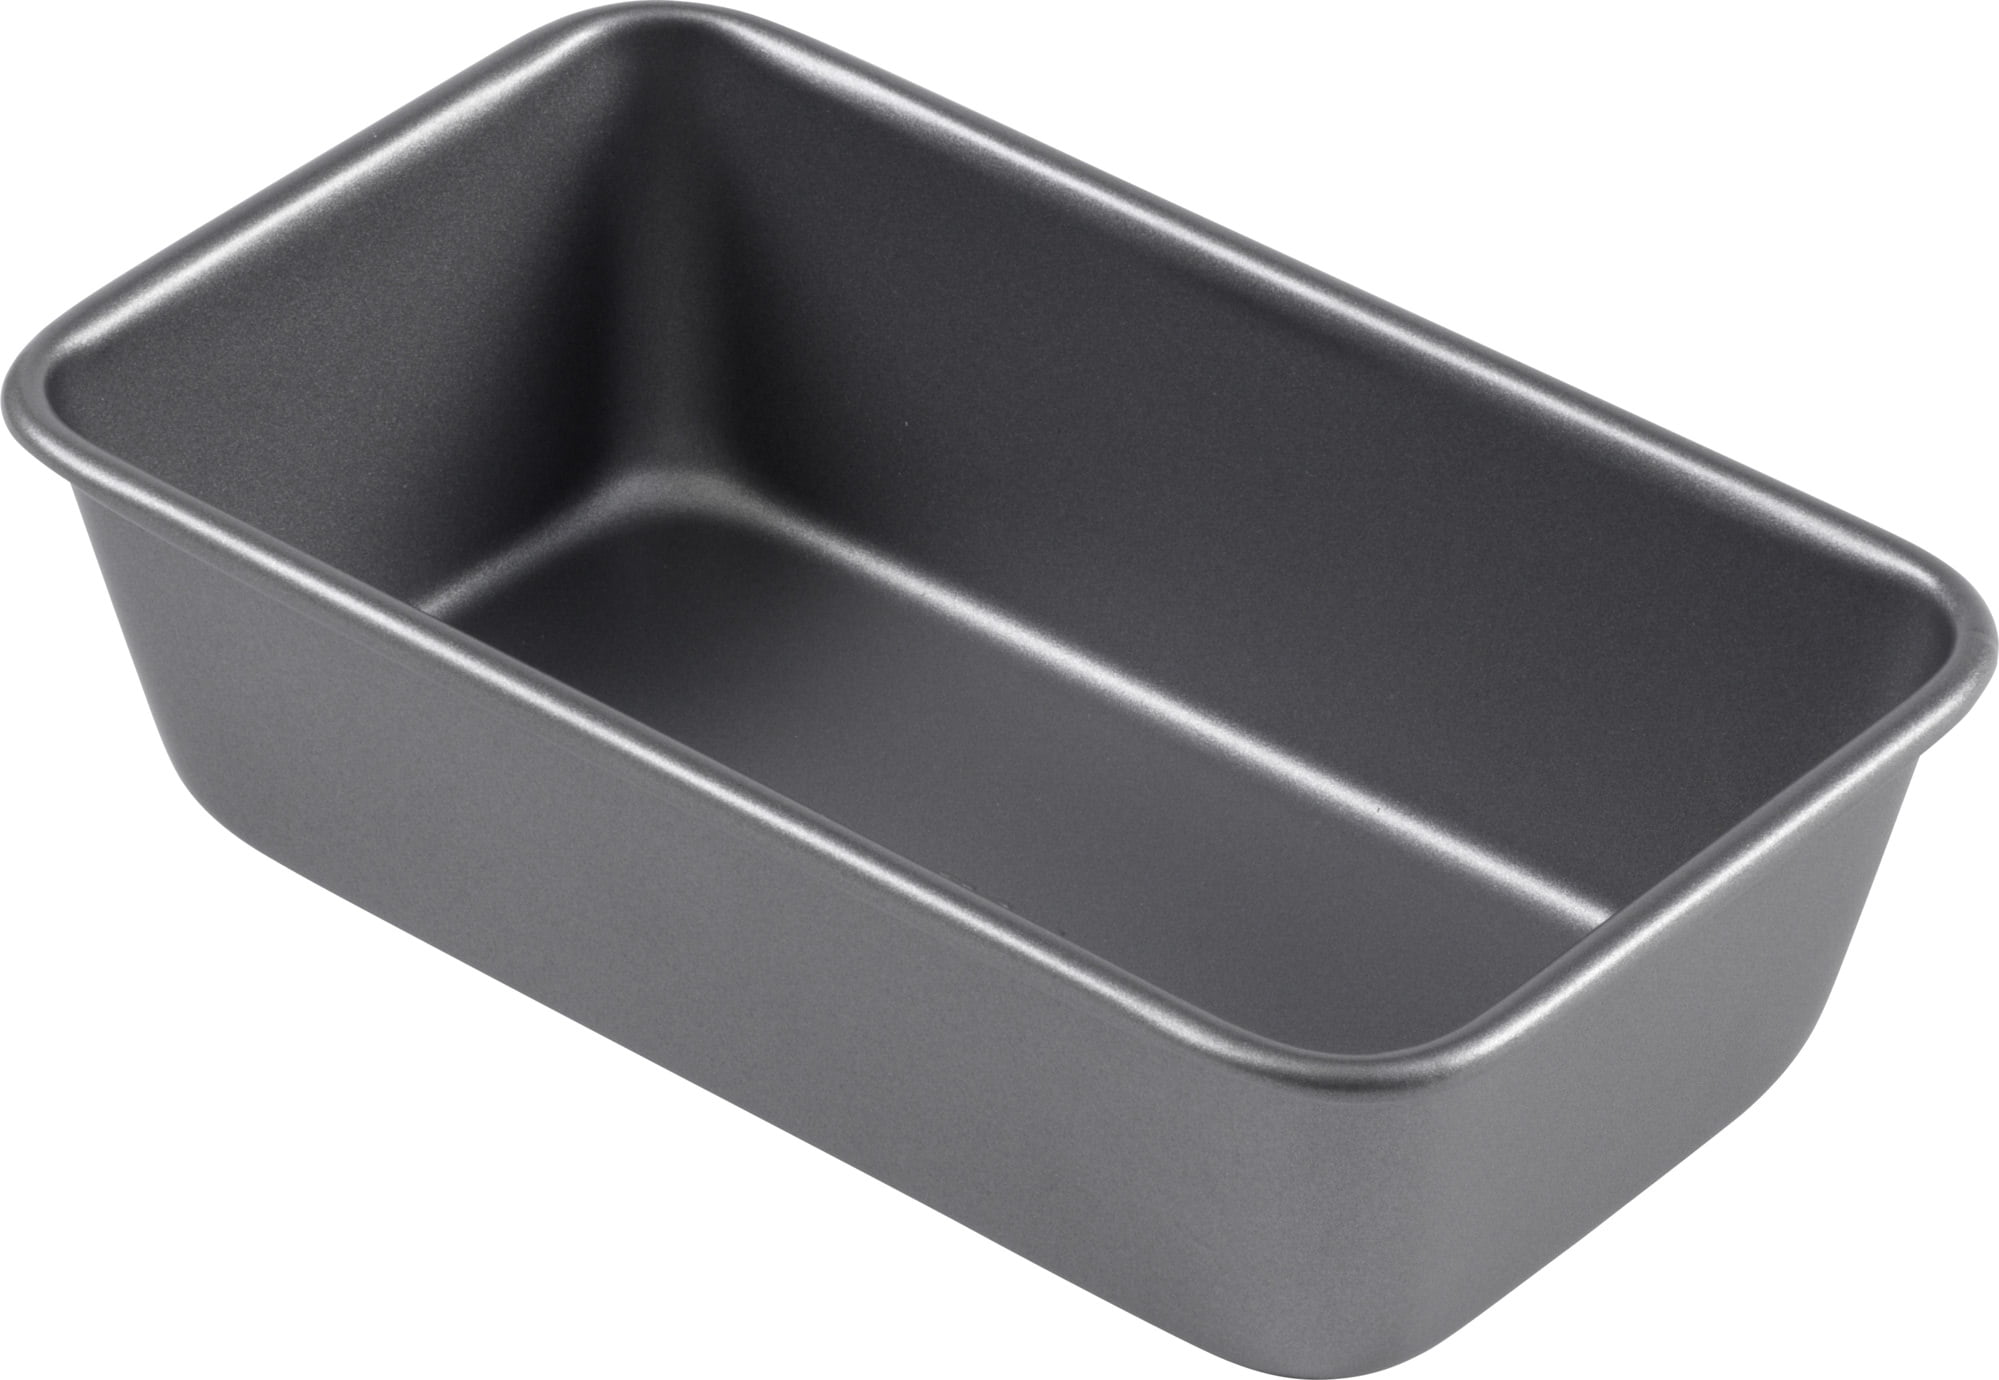 USA Pan 9in x 5in Loaf Pan - Kitchen & Company